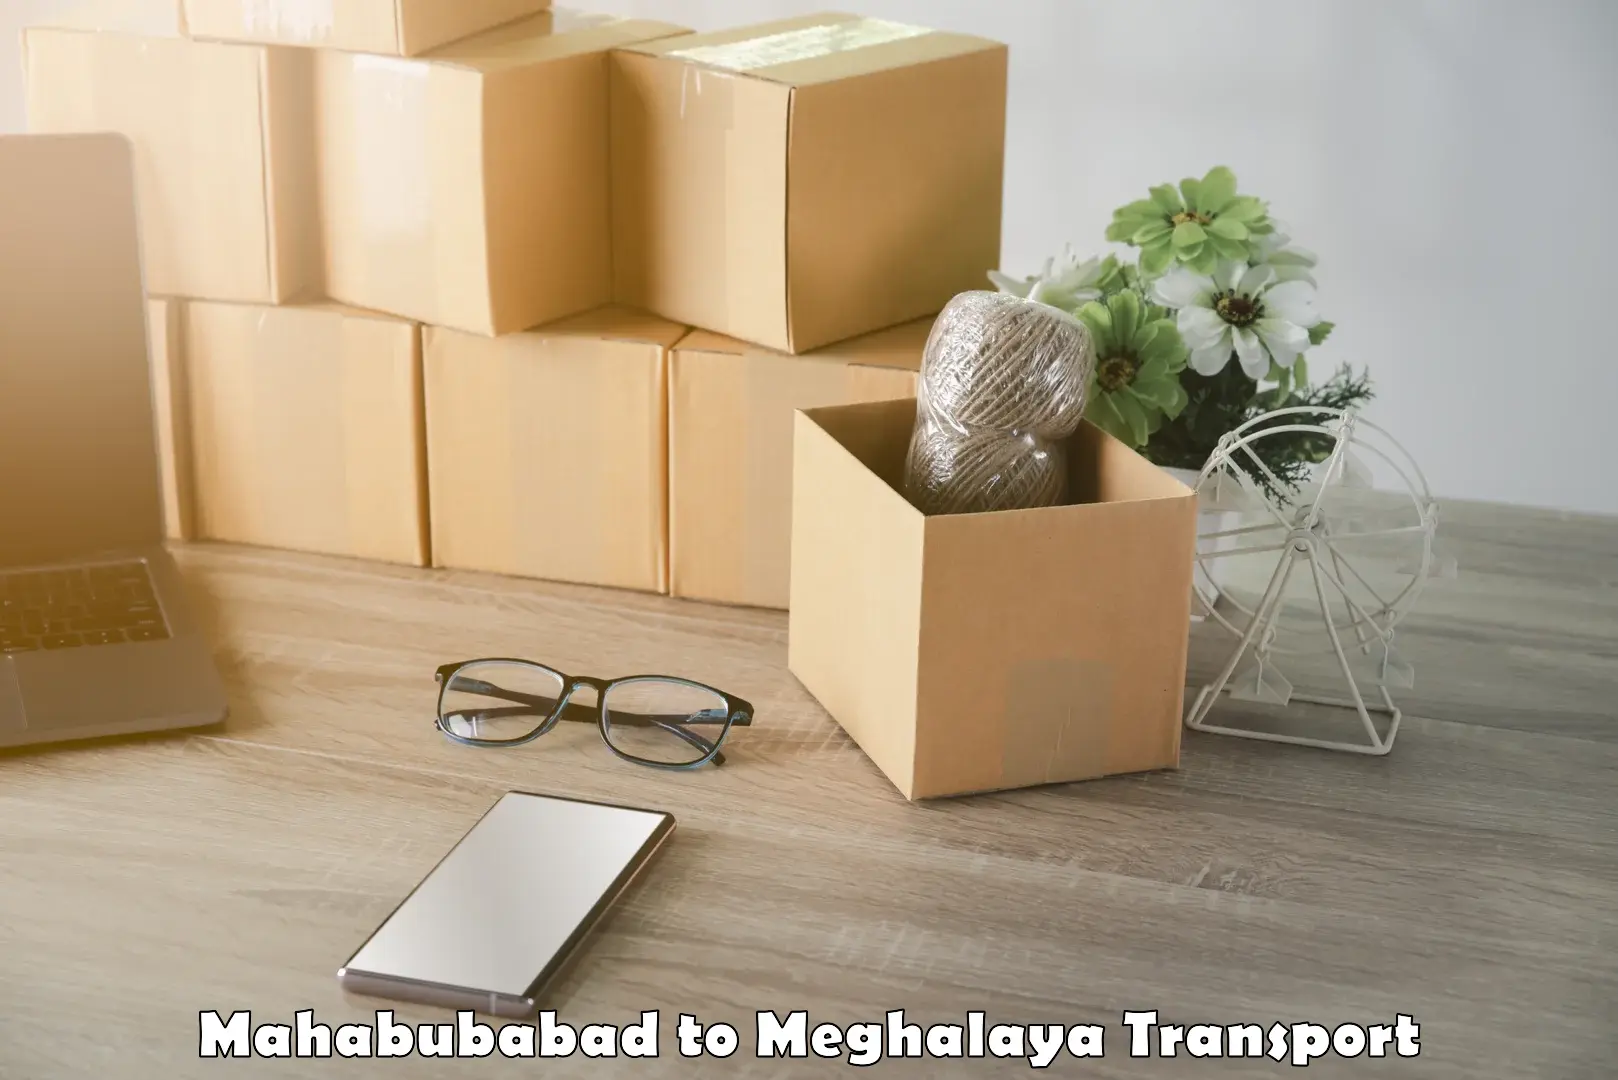 Truck transport companies in India Mahabubabad to Umsaw